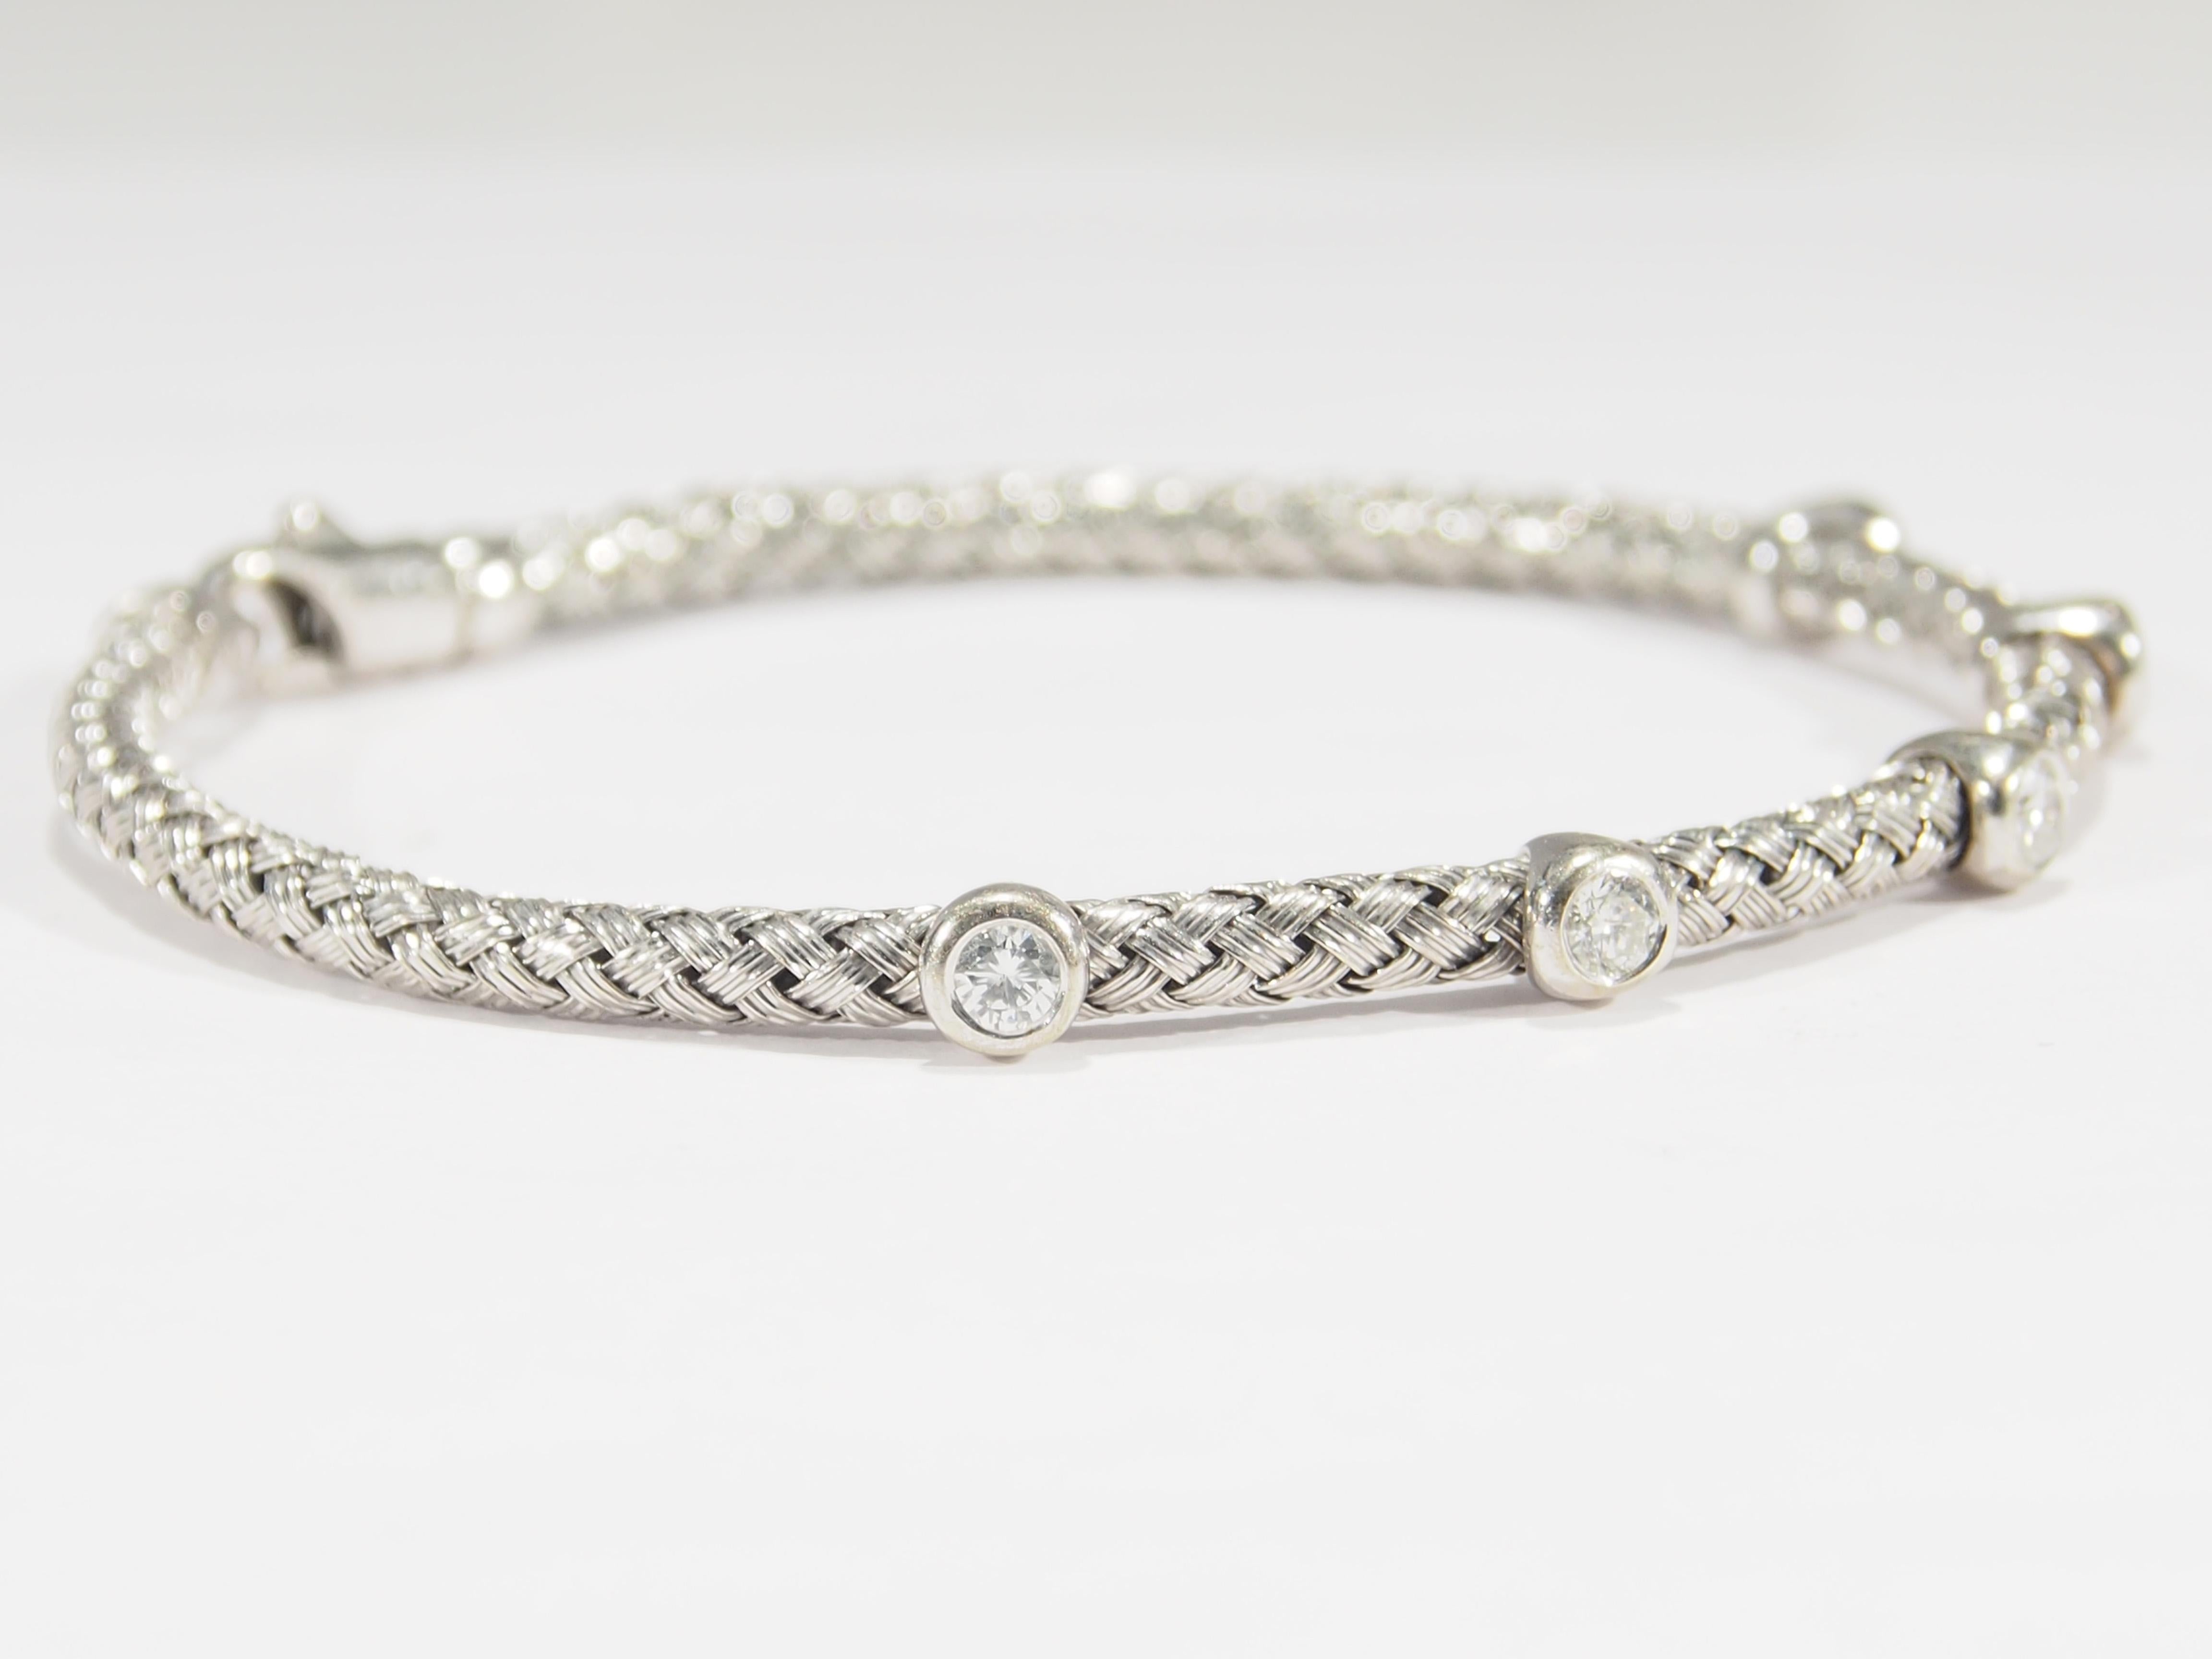 An Italian 14K white gold Rope bracelet with (5) Bezel set Round Brilliant Cut diamonds H-I in color, SI1-I1 in clarity and approximately 0.75 total weight. 7 inch inner circumference, approximately 3.5mm gauge, Lobster Claw closure. 9.17g.